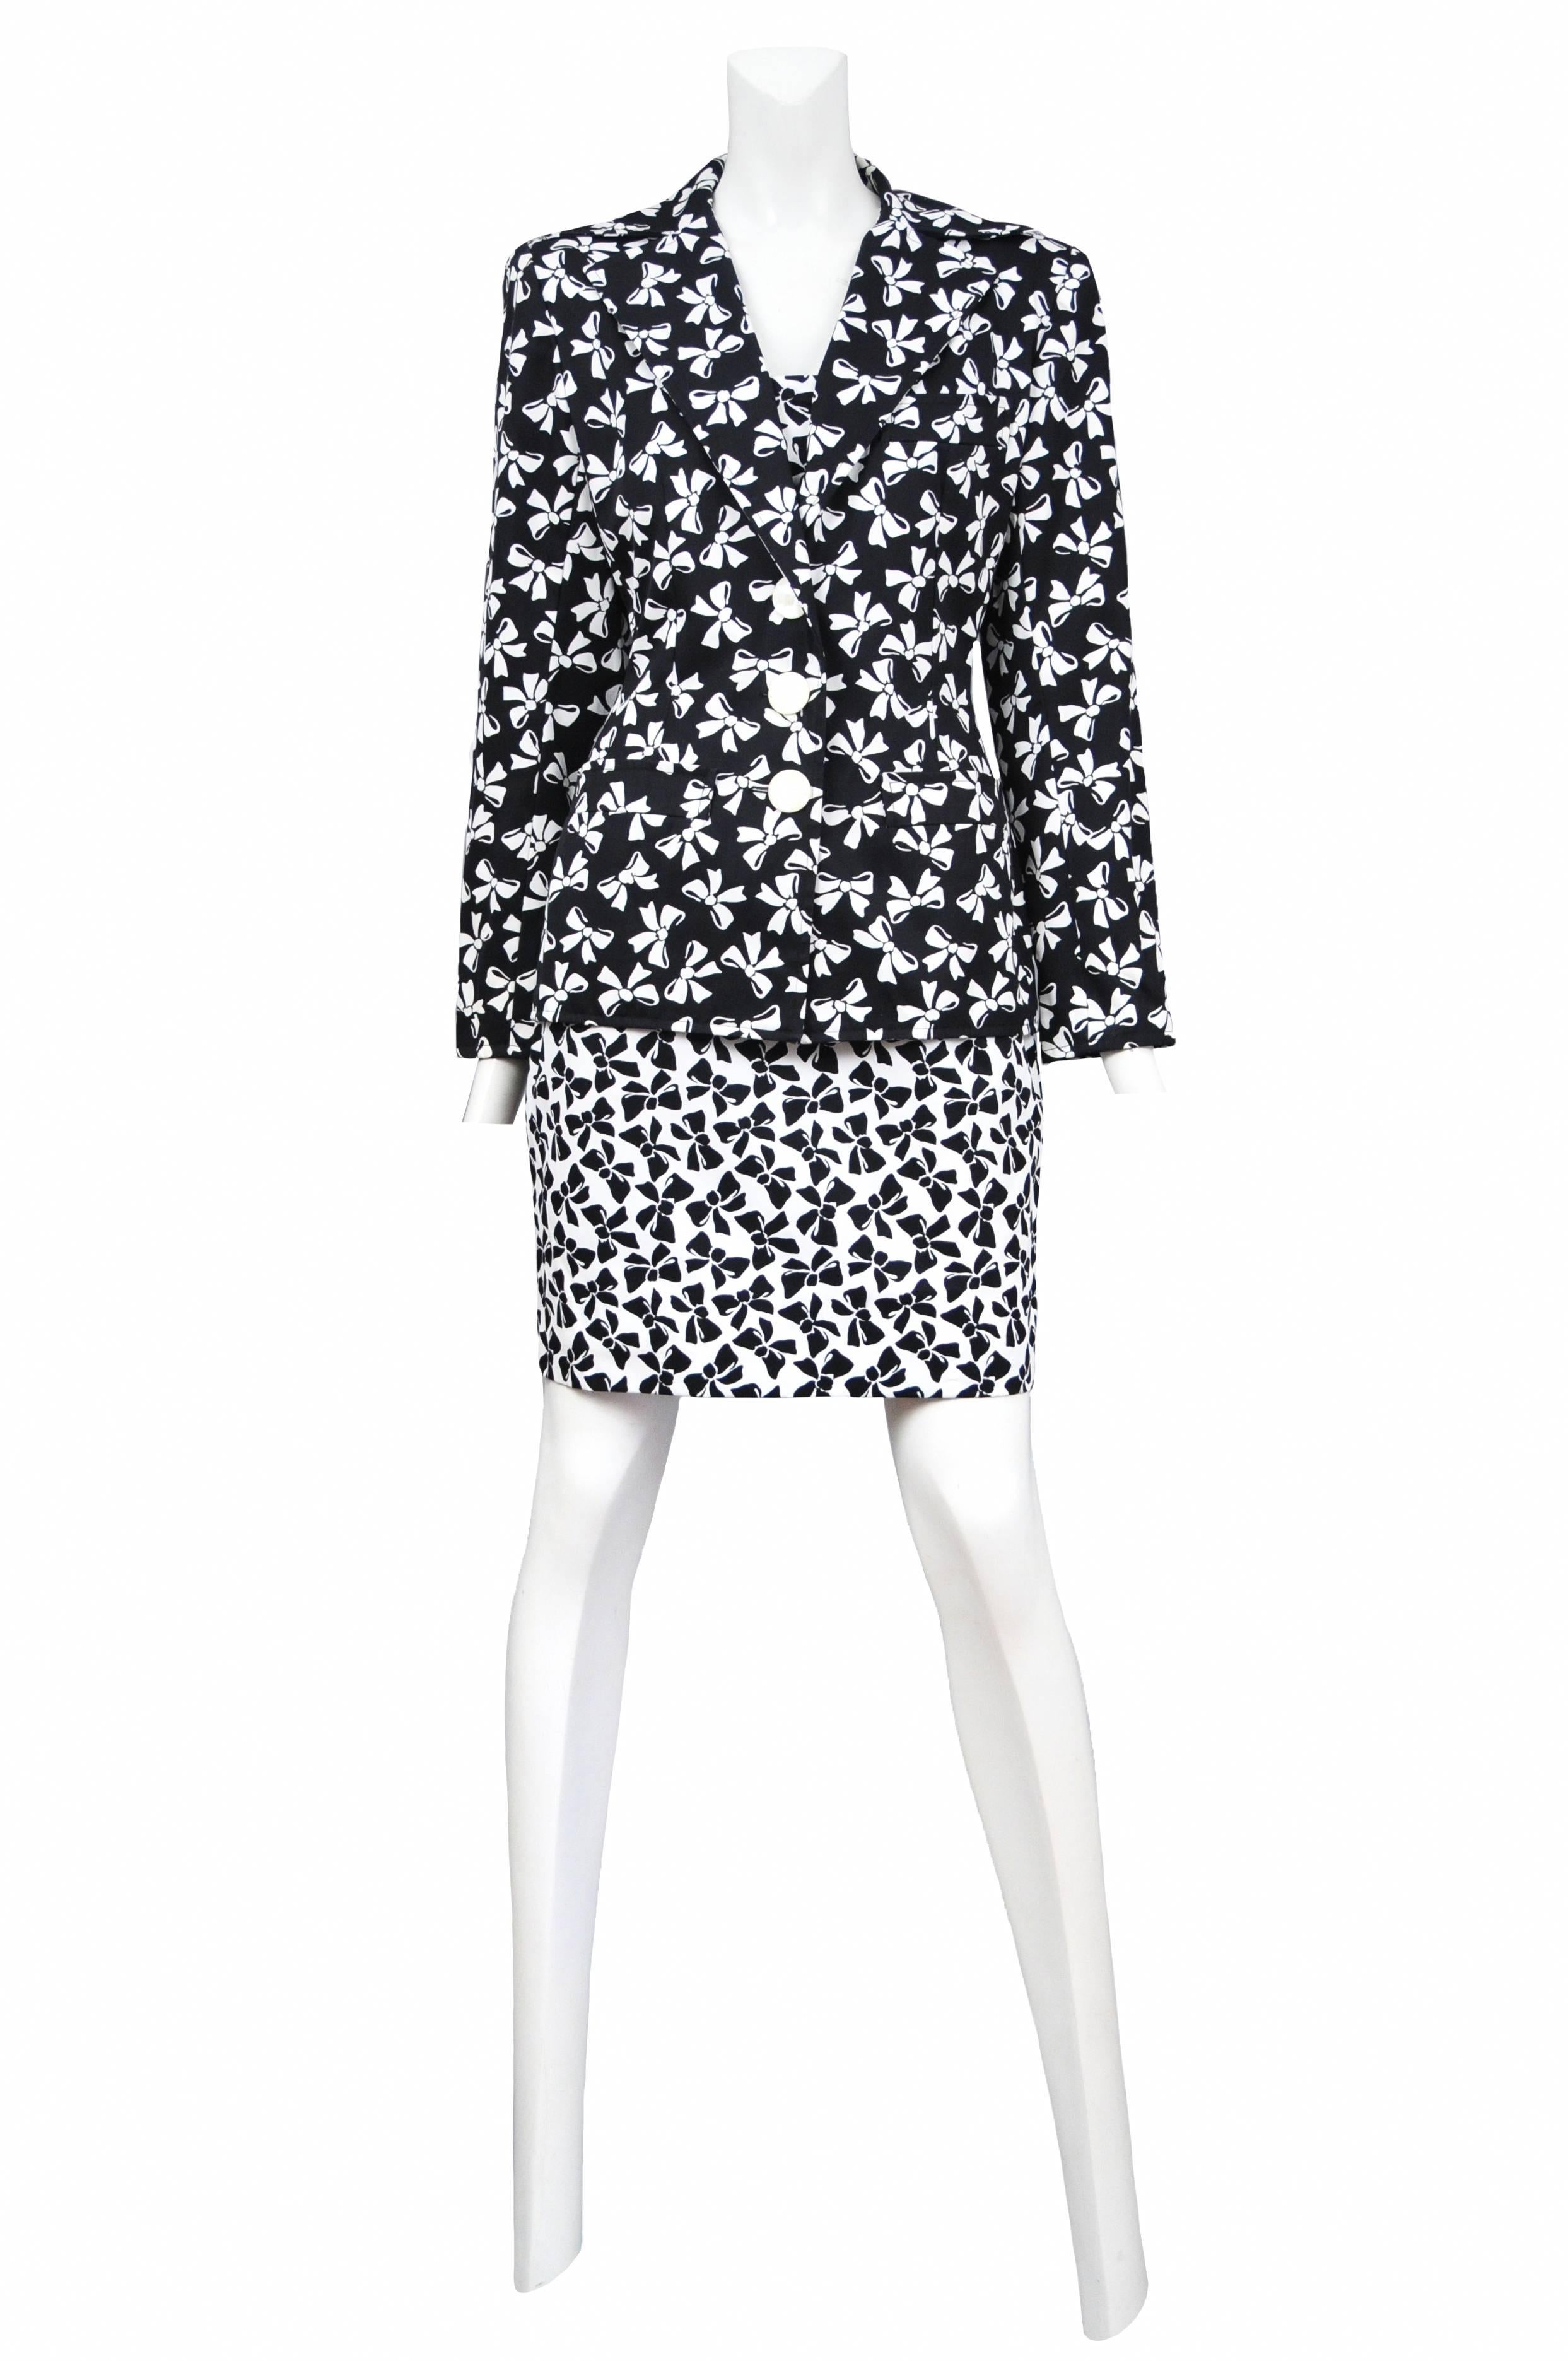 Vintage Yves Saint Laurent black and white ensemble featuring a traditional button front black blazer with a white bow print and matching strapless mini dress using the negative version of the bow print.
Please inquire for additional images.